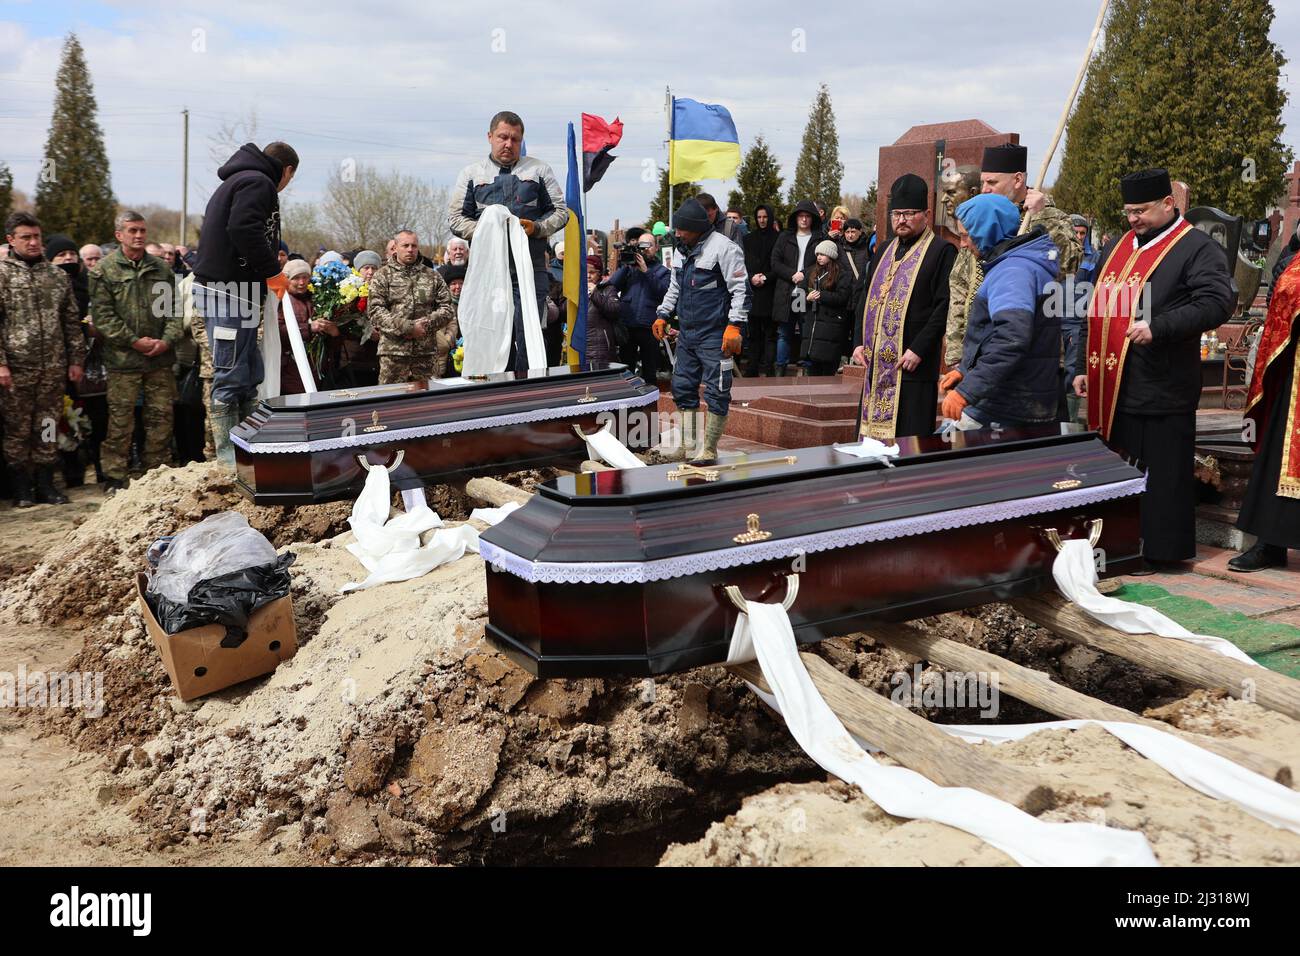 Coffins are seen during a funeral ceremony for Ukrainian defenders, brothers Roman and Leonid Butusin, town of Kalush, Ivano-Frankivsk Region, western Ukraine on April 4, 2022. Photo by Yurii Rylchuk/Ukrinform/ABACAPRESS.COM Stock Photo